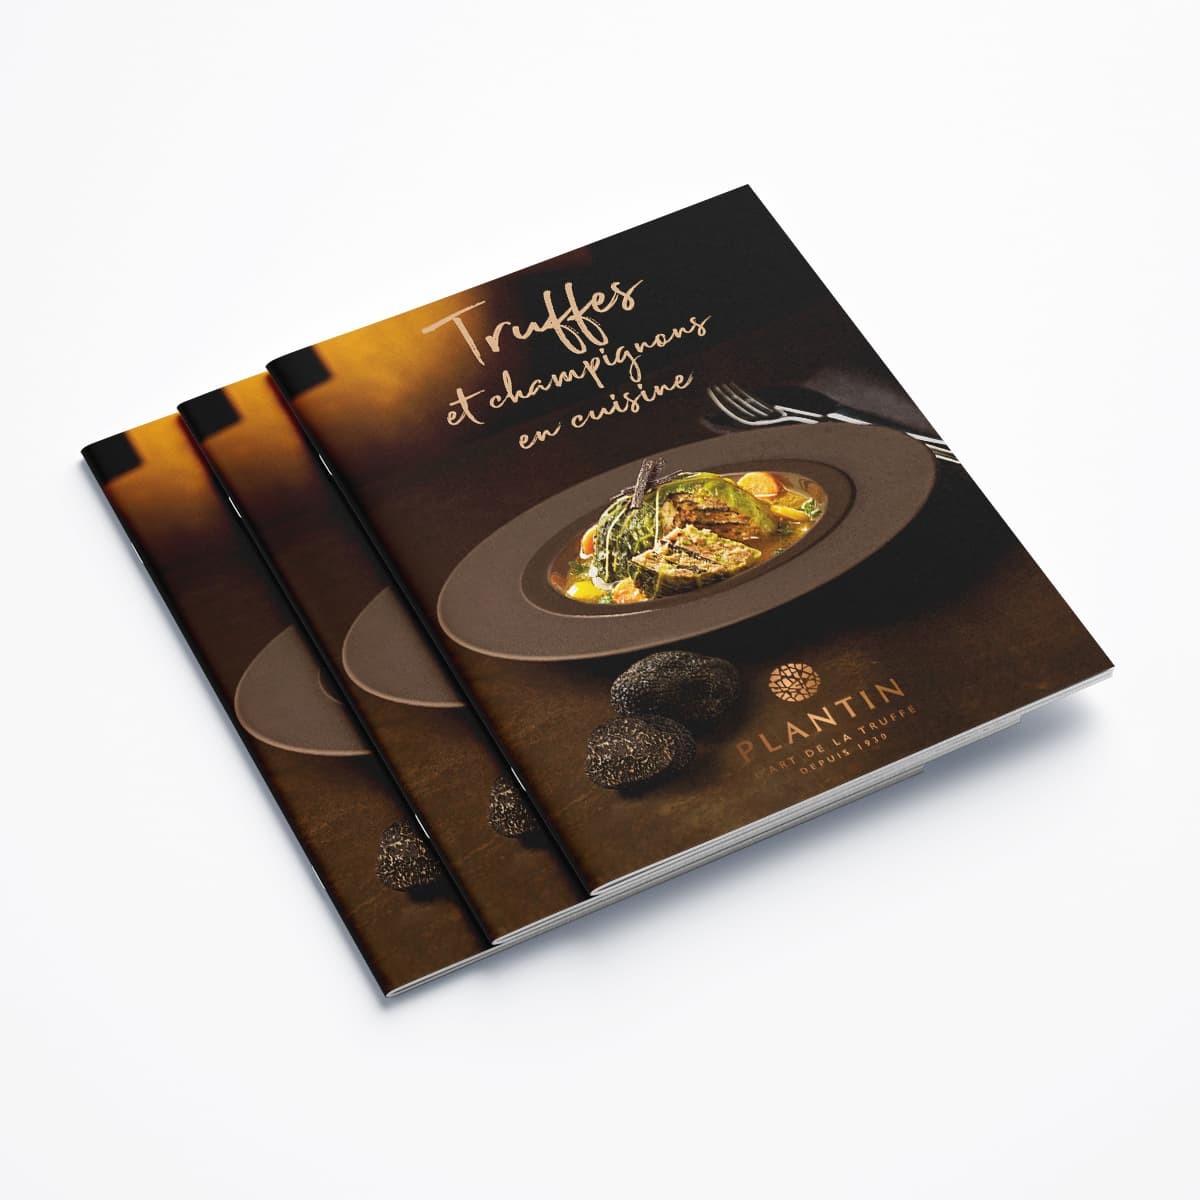 Recipe booklet "Cooking with truffles and mushrooms"